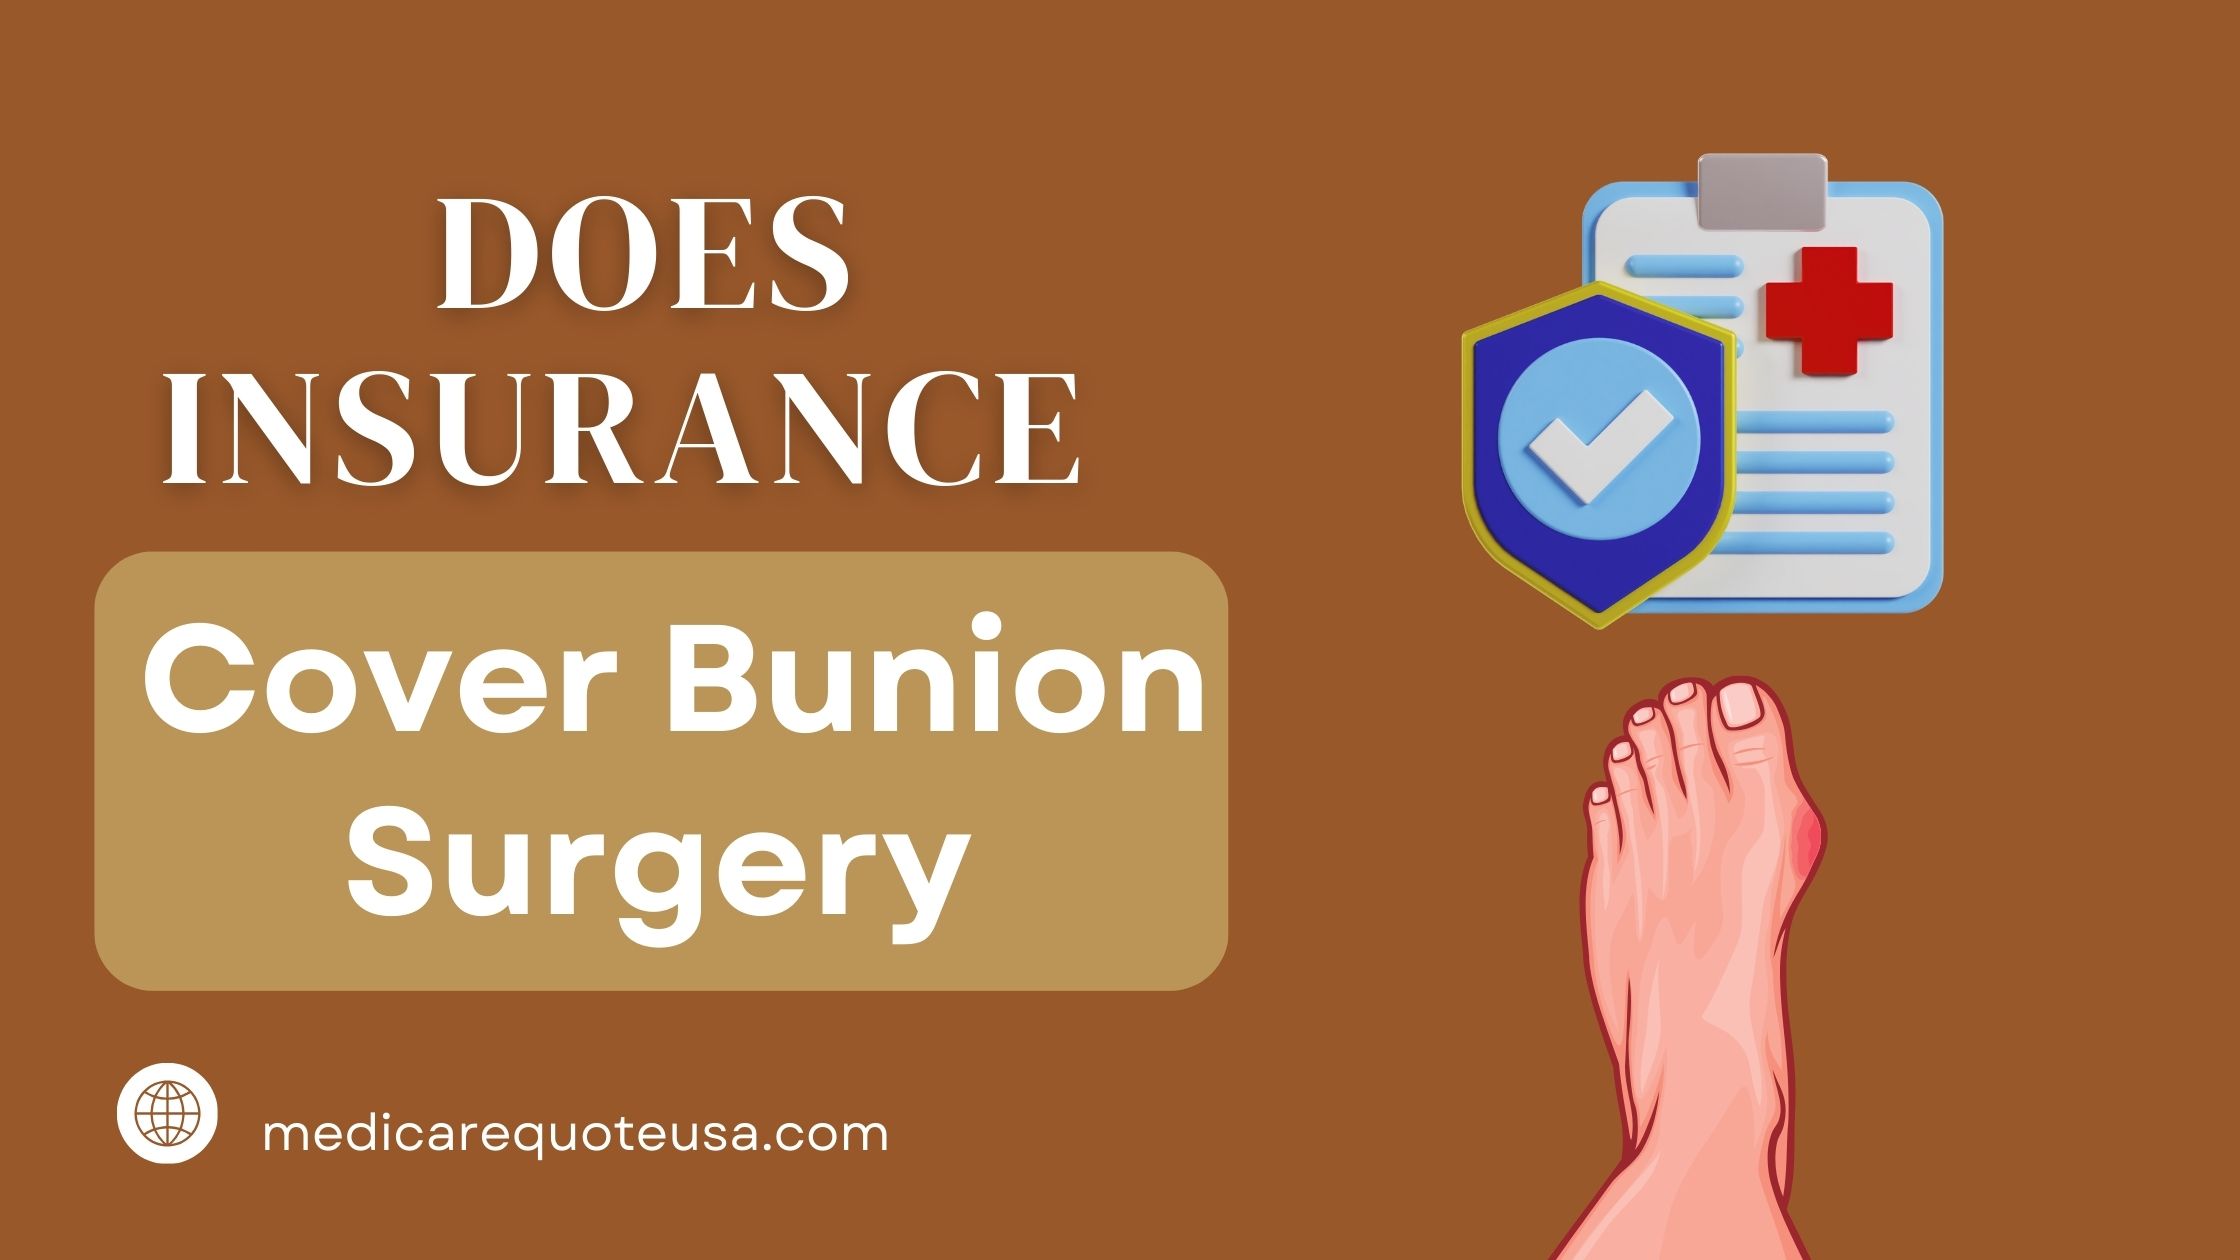 Does Insurance Covers Bunion Surgery